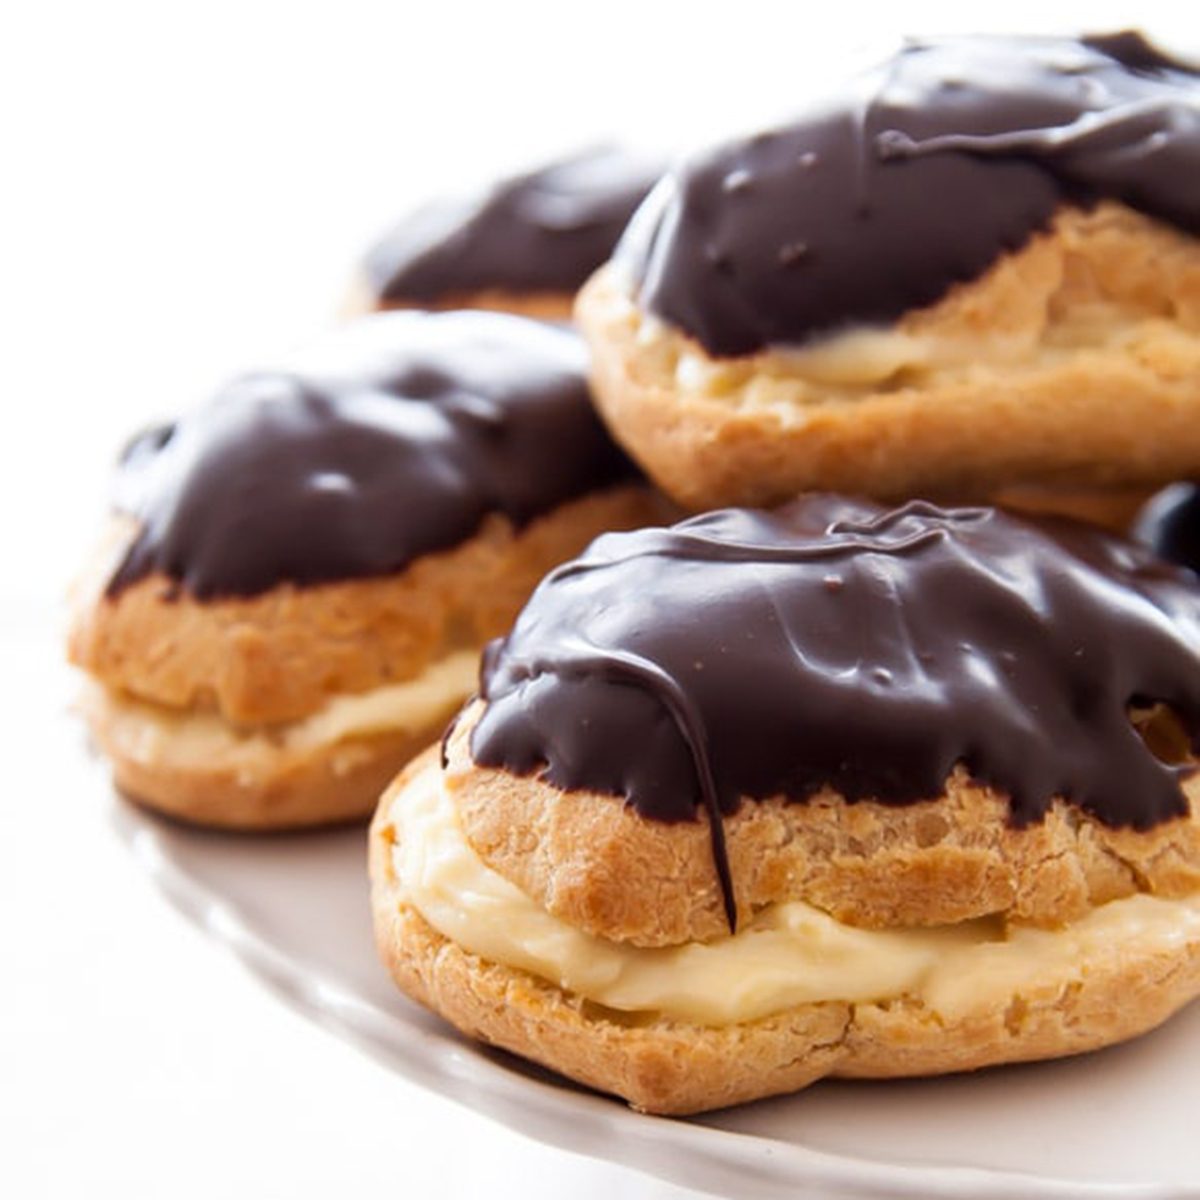 12 Eclair Recipes That We Can't Wait to Make Again